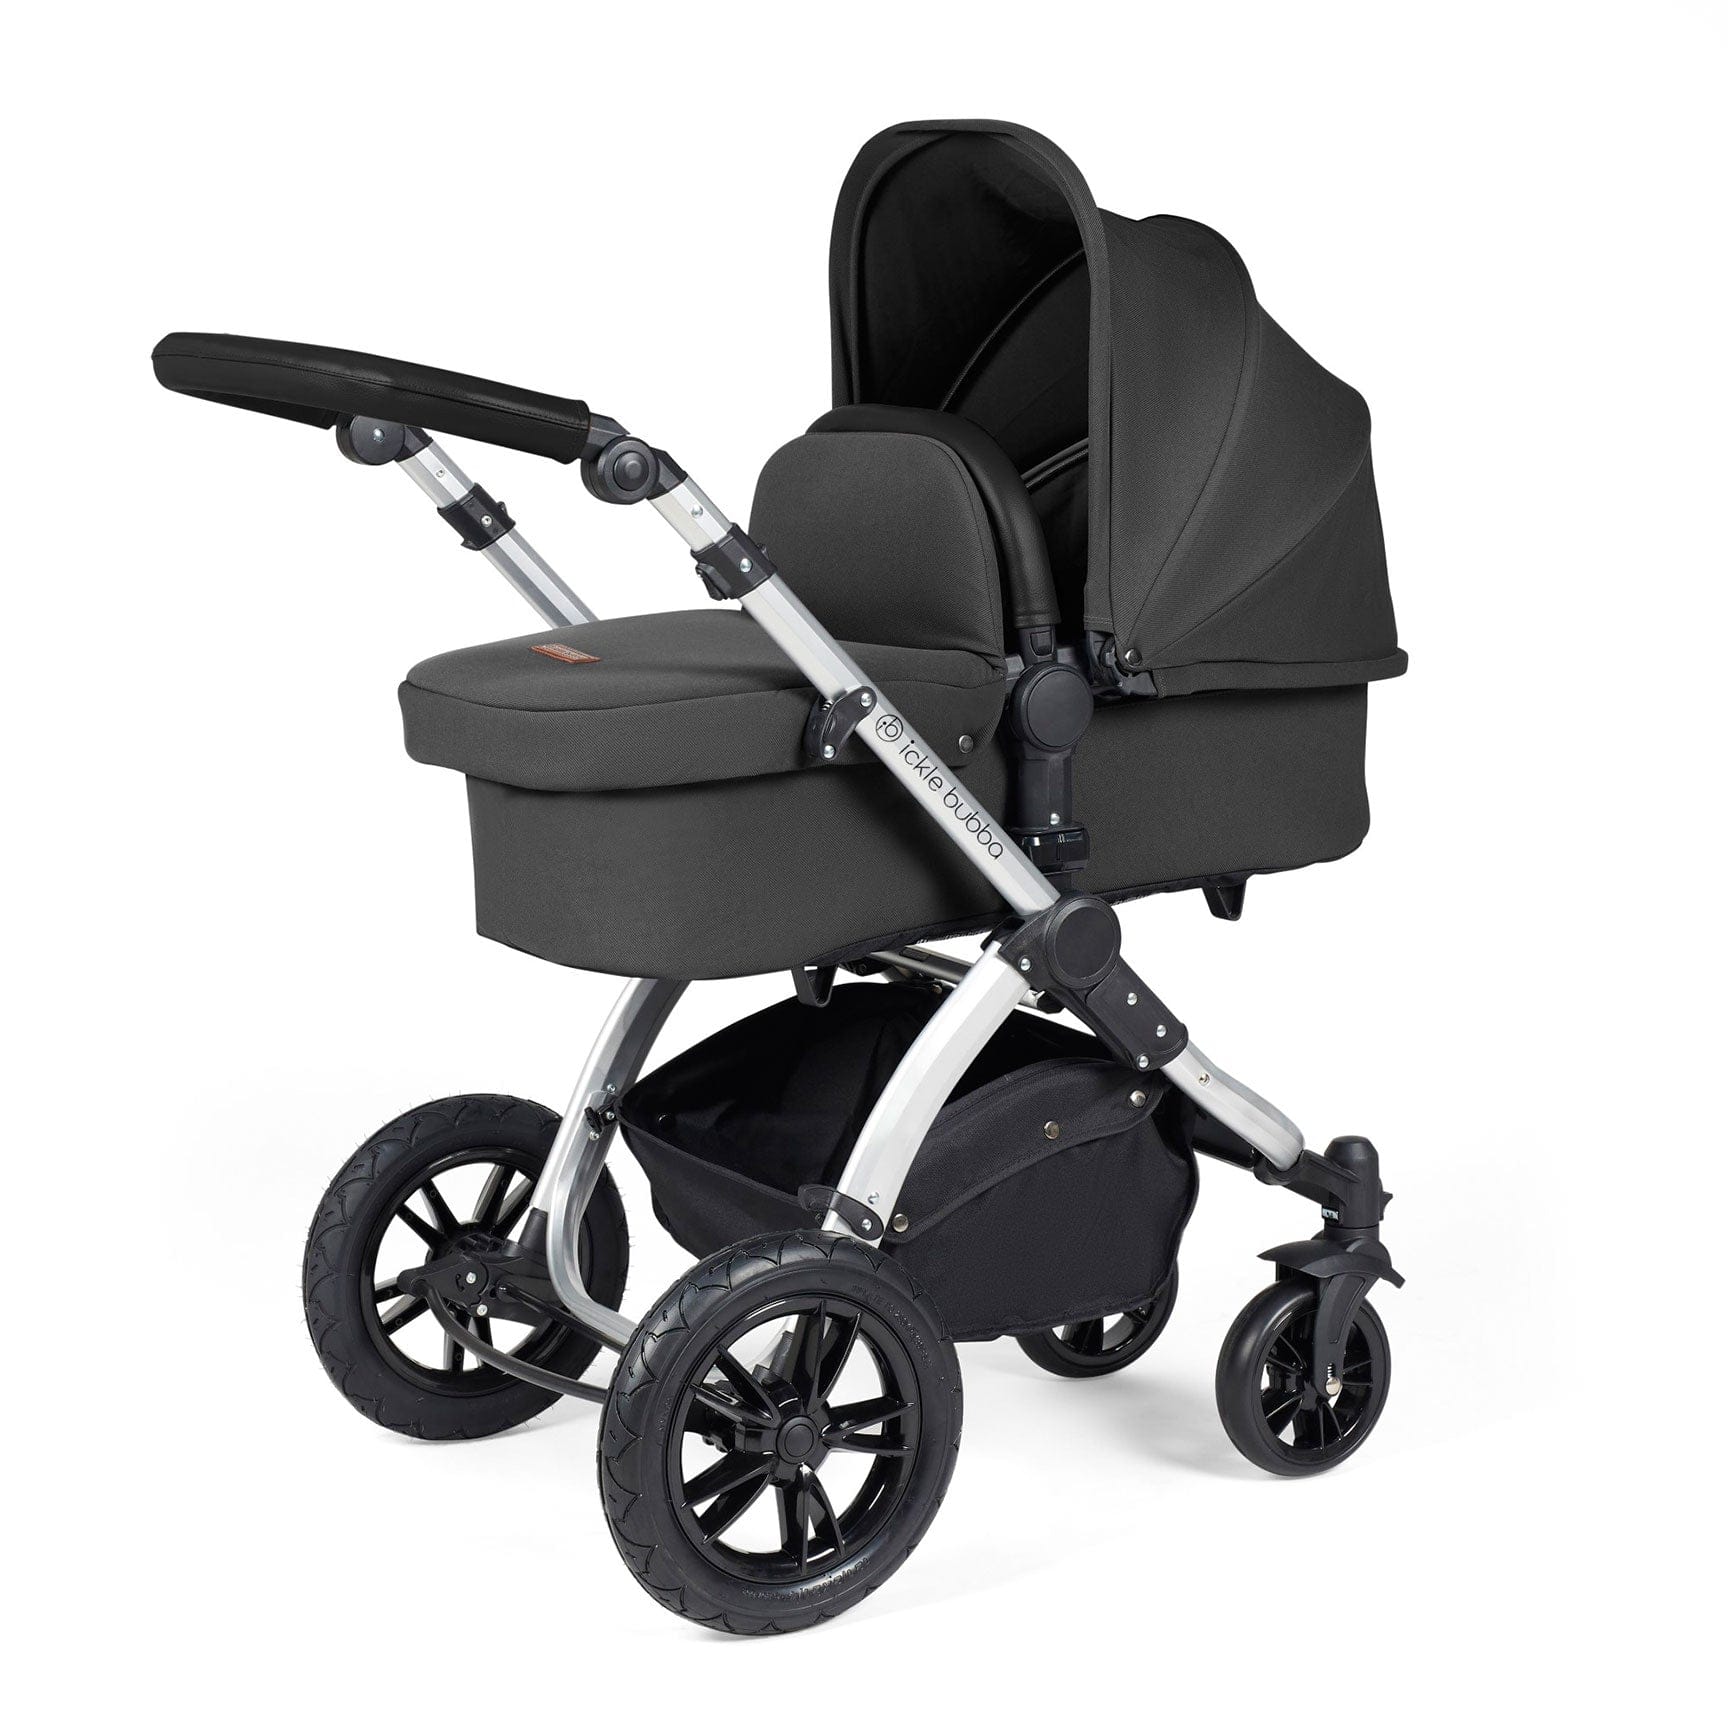 Ickle Bubba Stomp Luxe All-in-One Travel System with Isofix Base in Silver/Charcoal Grey/Black Travel Systems 10-011-300-254 5056515026559